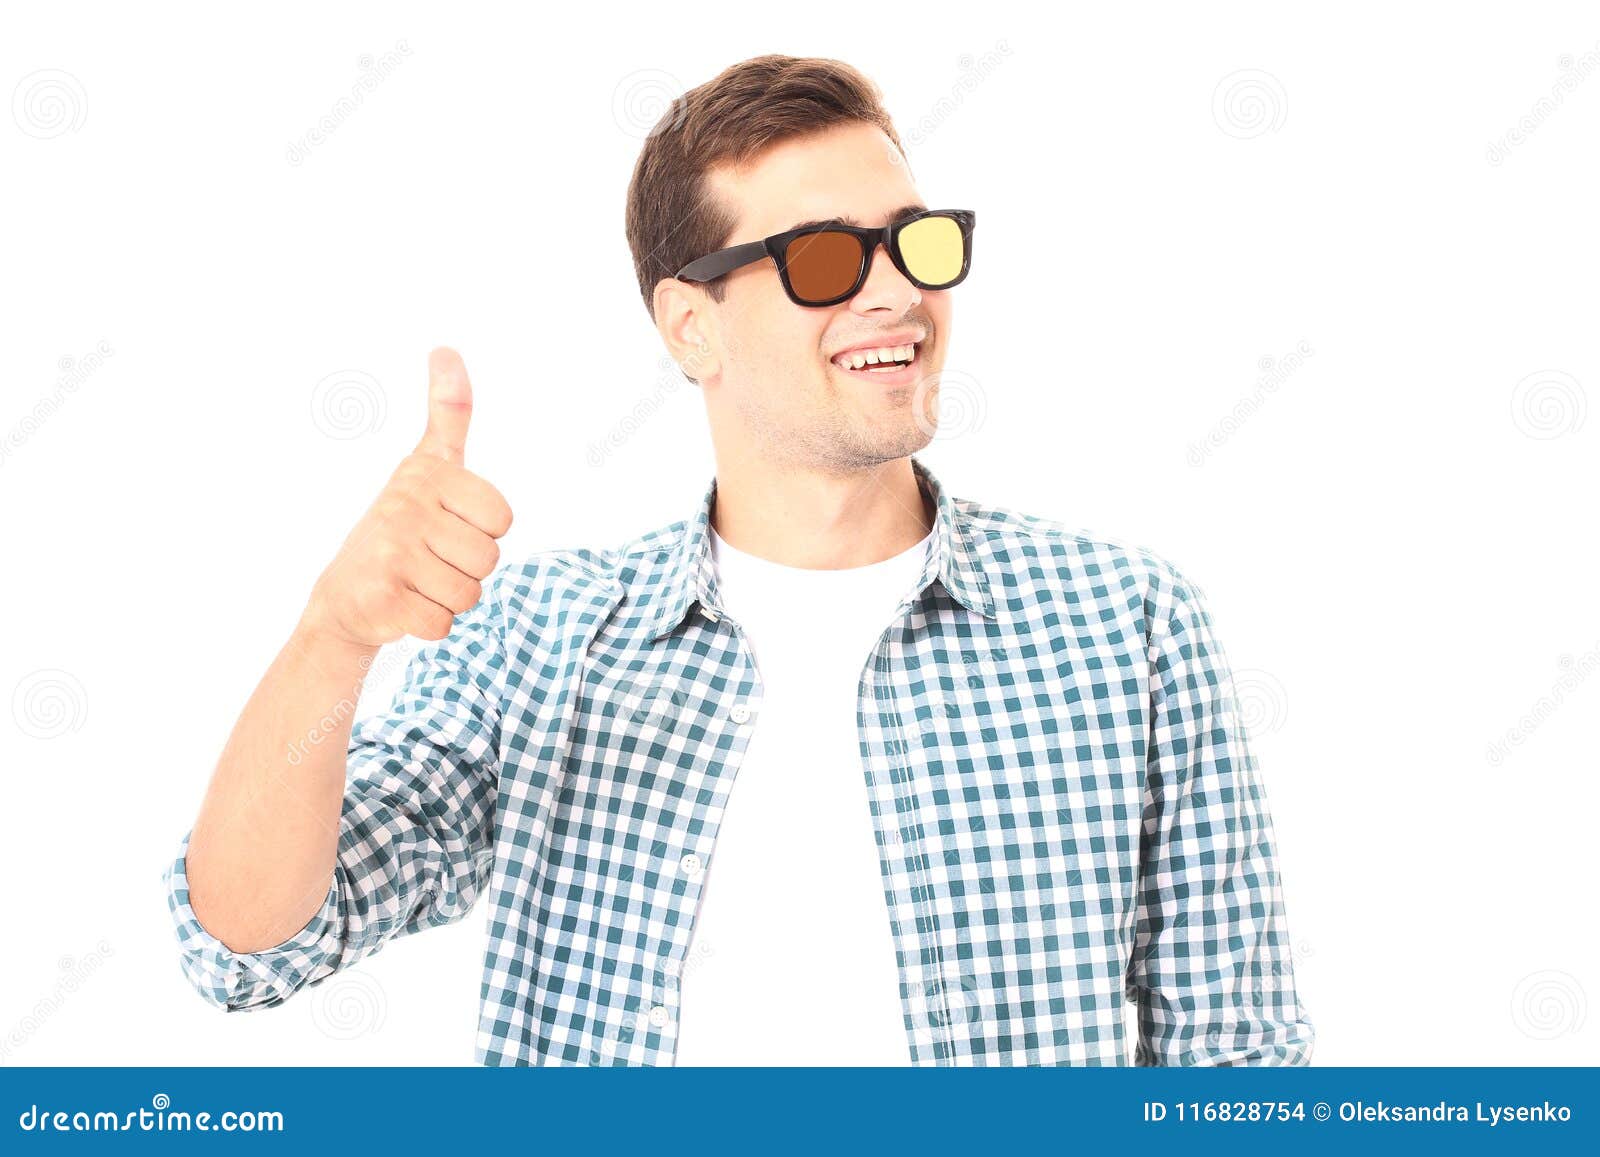 Stylish Smiling Guy. Cheerful Young Handsome Man in Sunglasses with ...